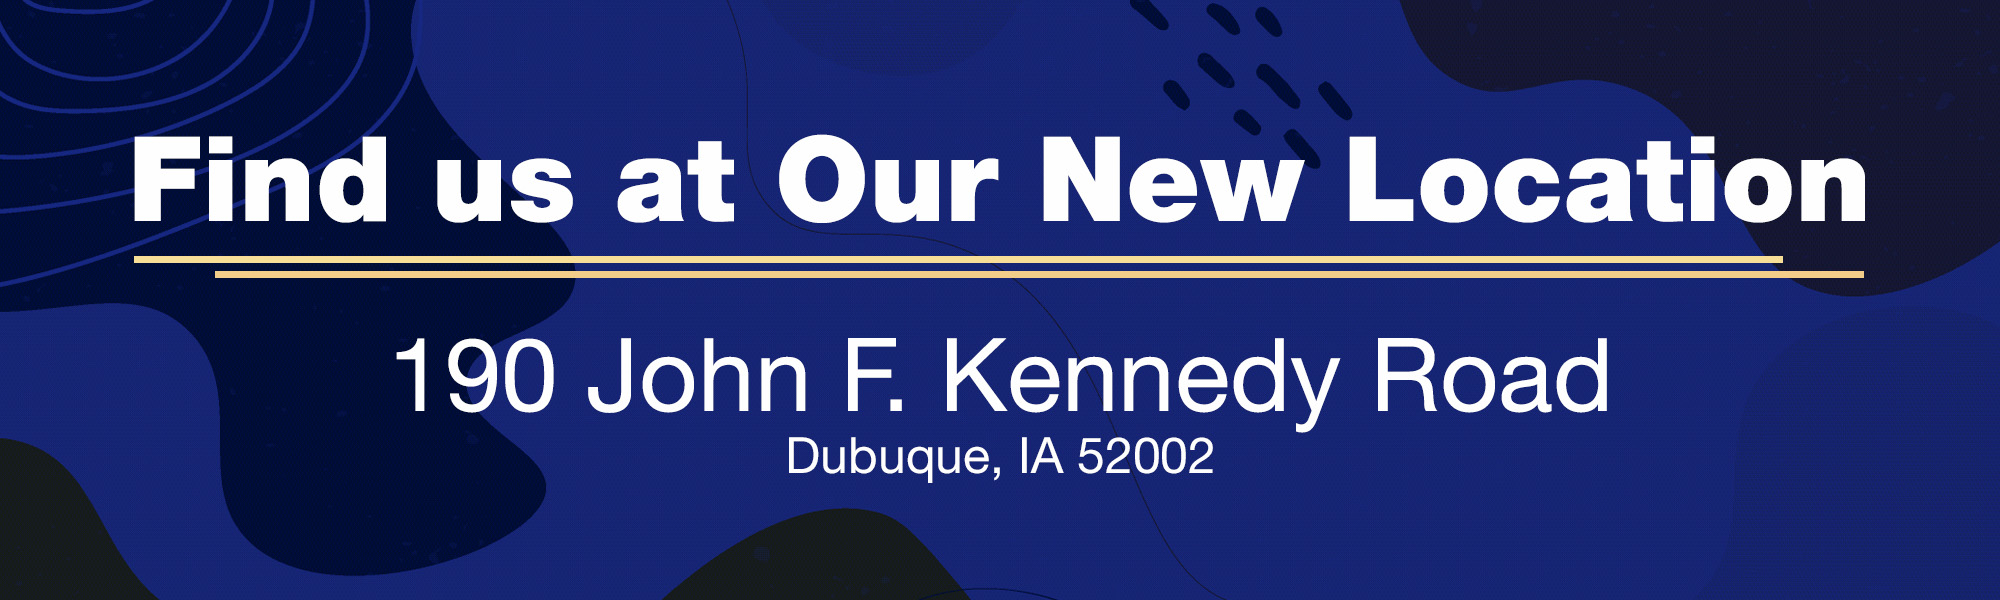 We have a new location! Find us at 190 John F. Kennedy Road, Dubuque, IA 52002